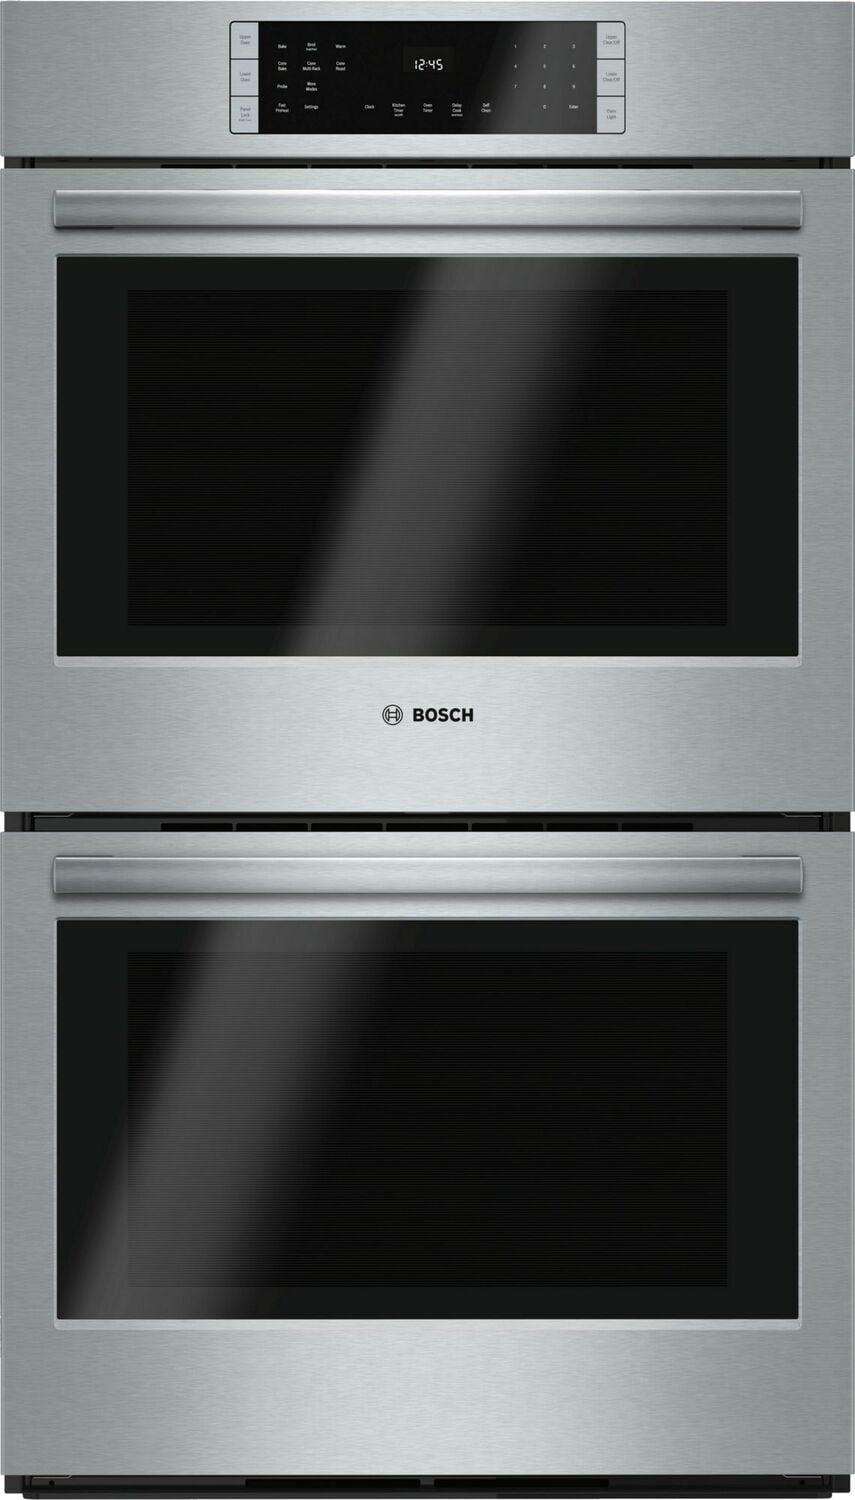 Bosch HBL8651UC 800 Series, 30", Double Wall Oven, Ss, Eu Conv./Thermal, Touch Control